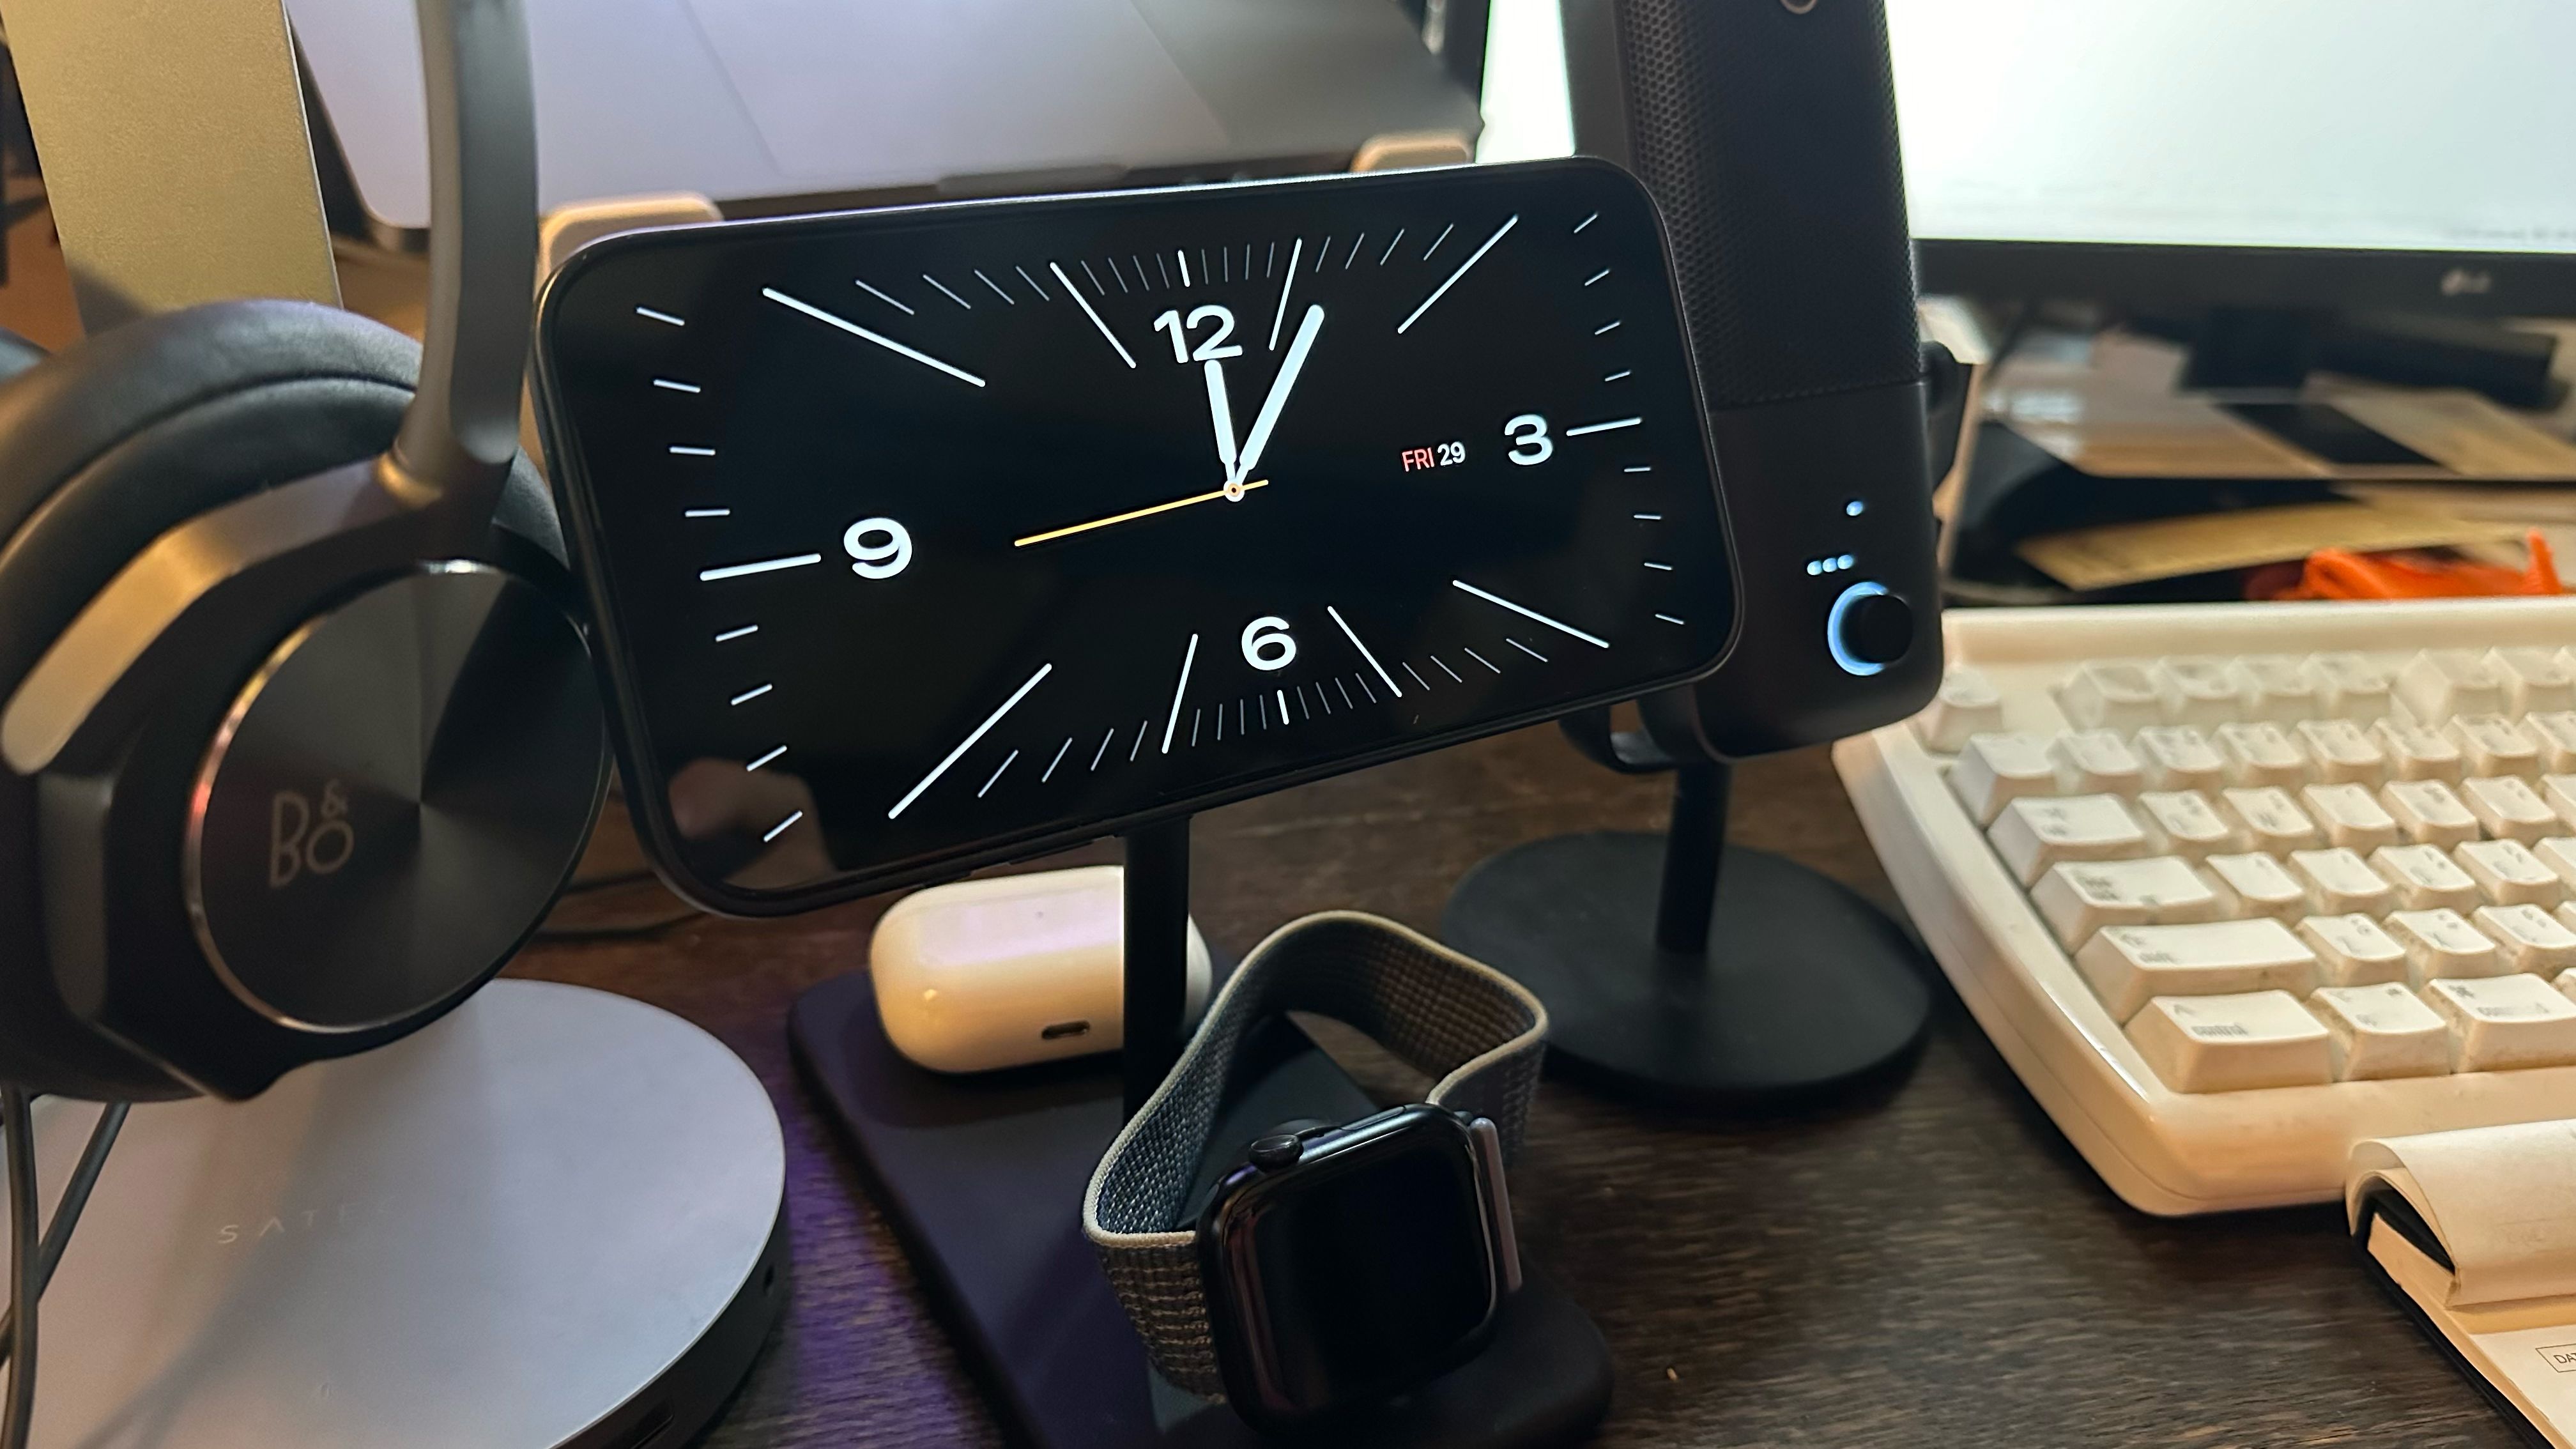 The Twelve South HiRise 3 Deluxe has a 3-in-1 design